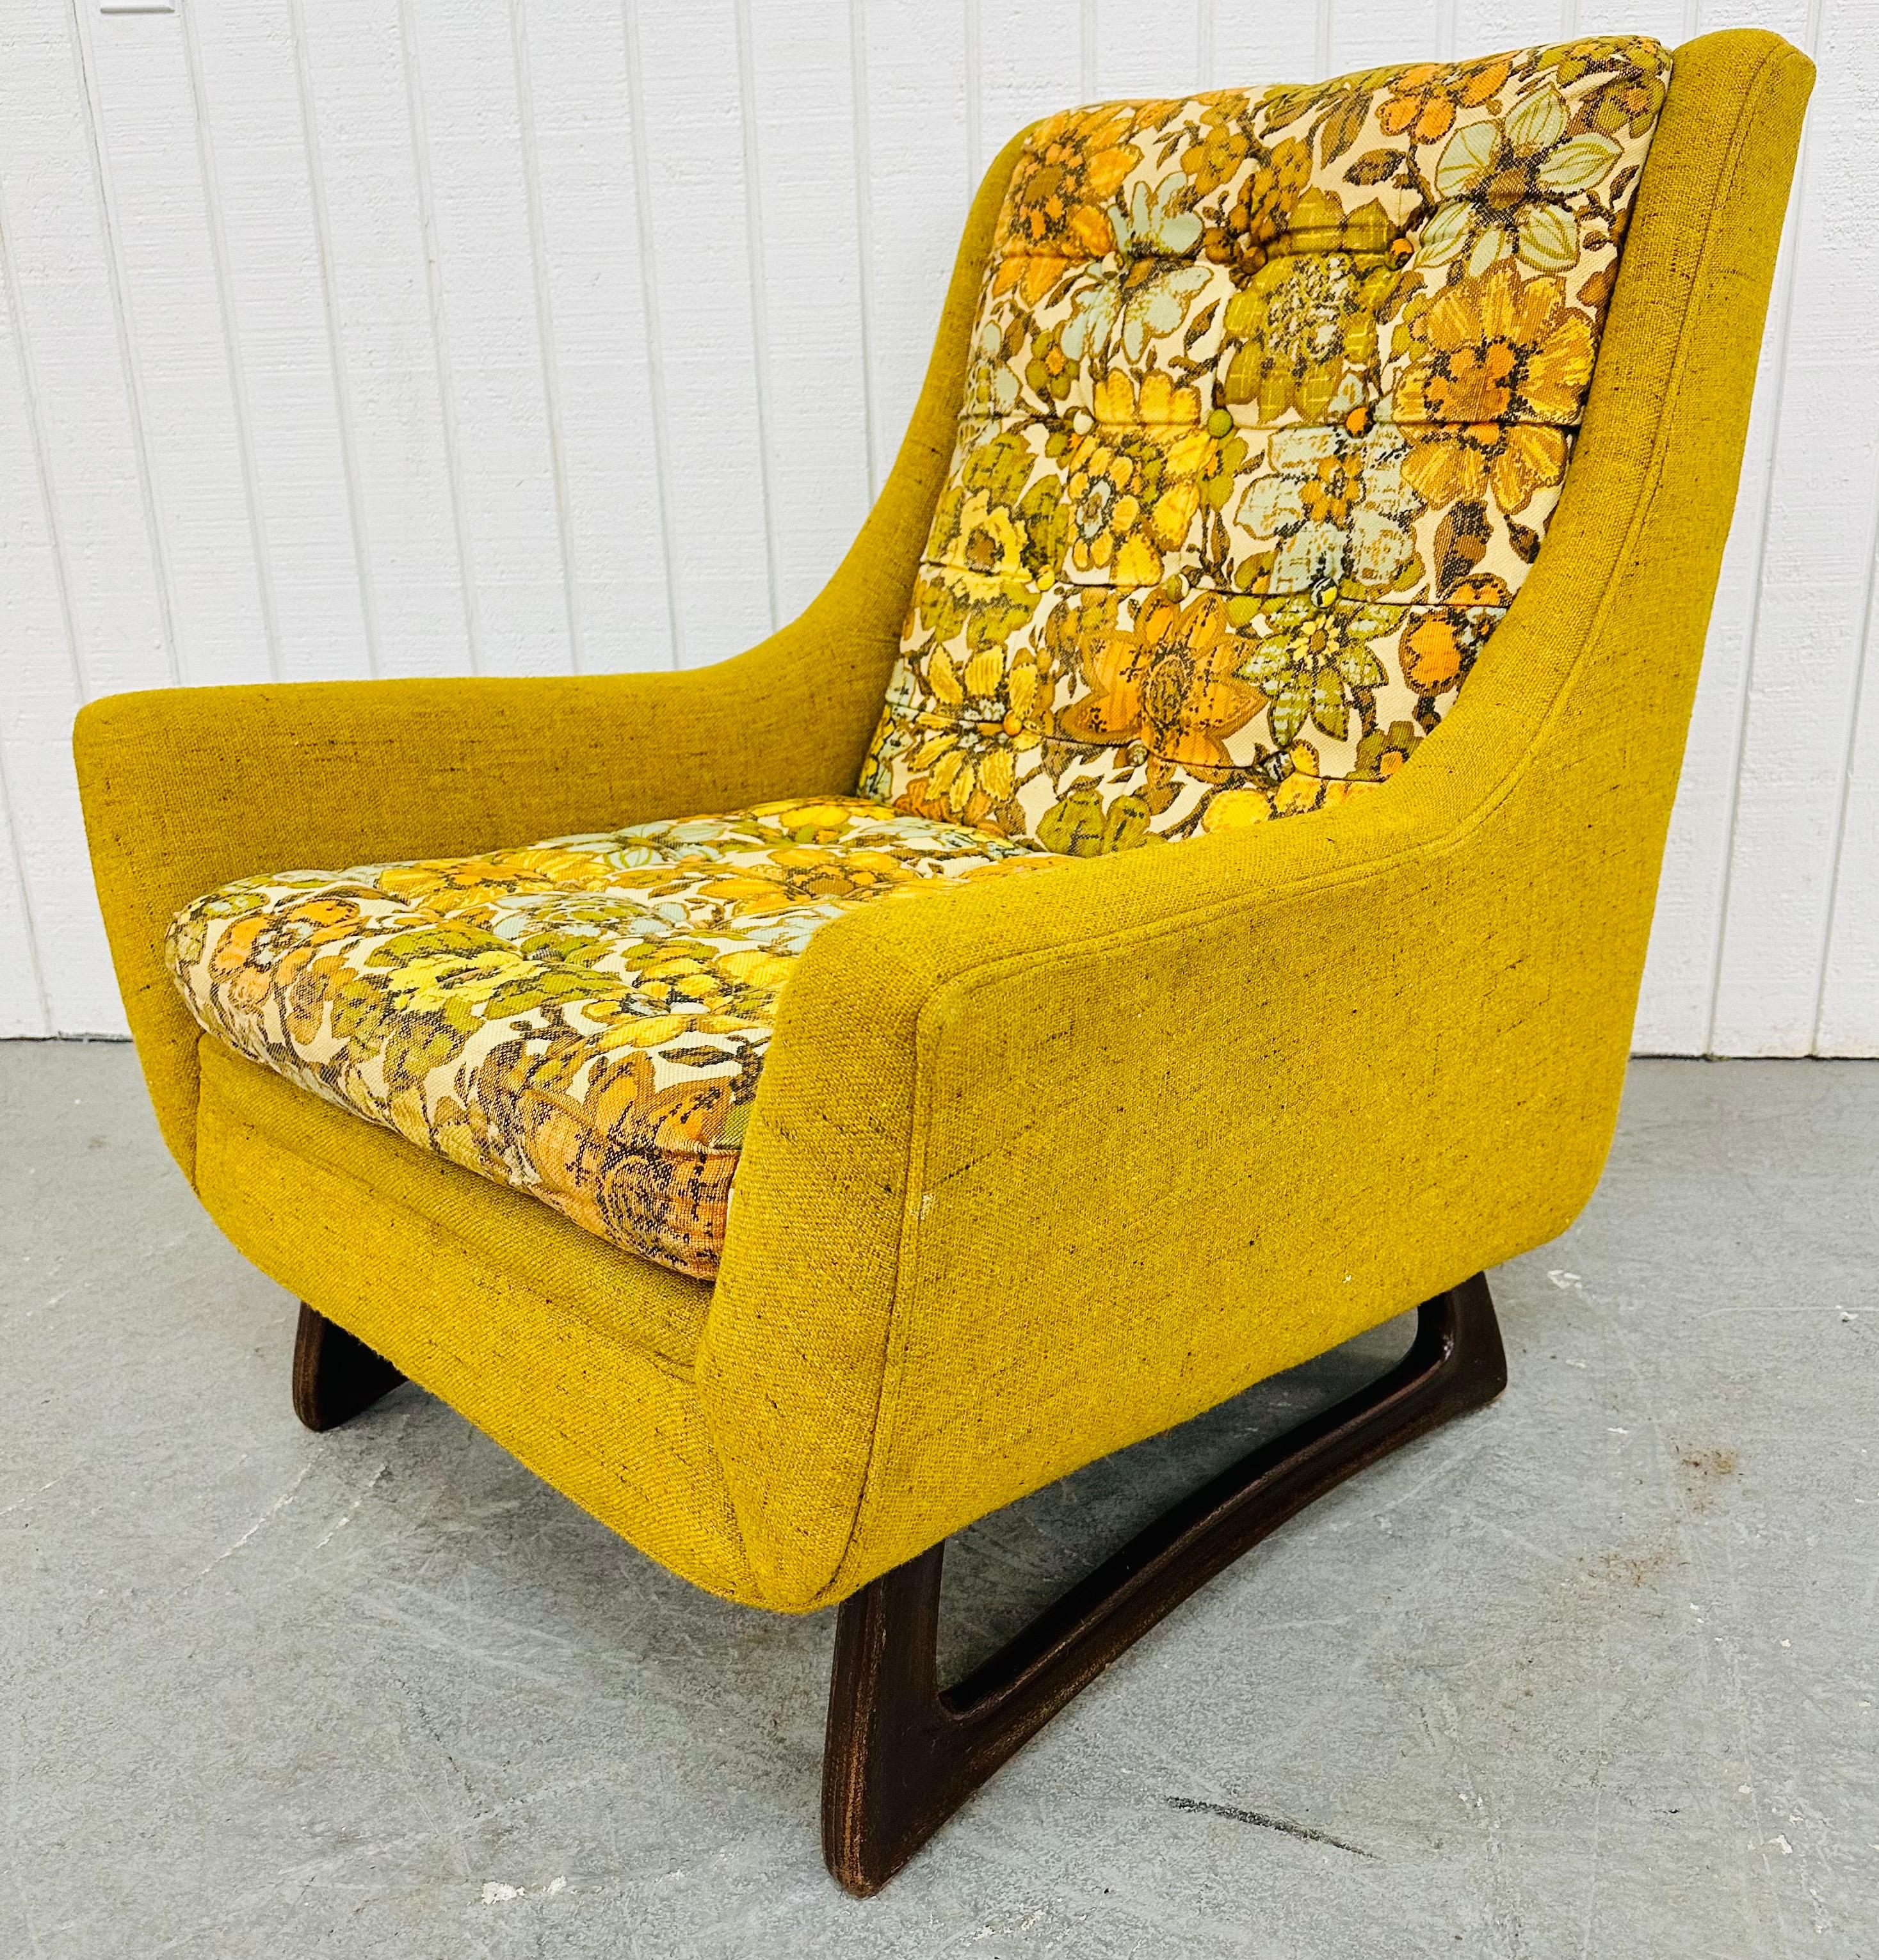 American Mid-Century Modern Adrian Pearsall Lounge Chair & Ottoman For Sale